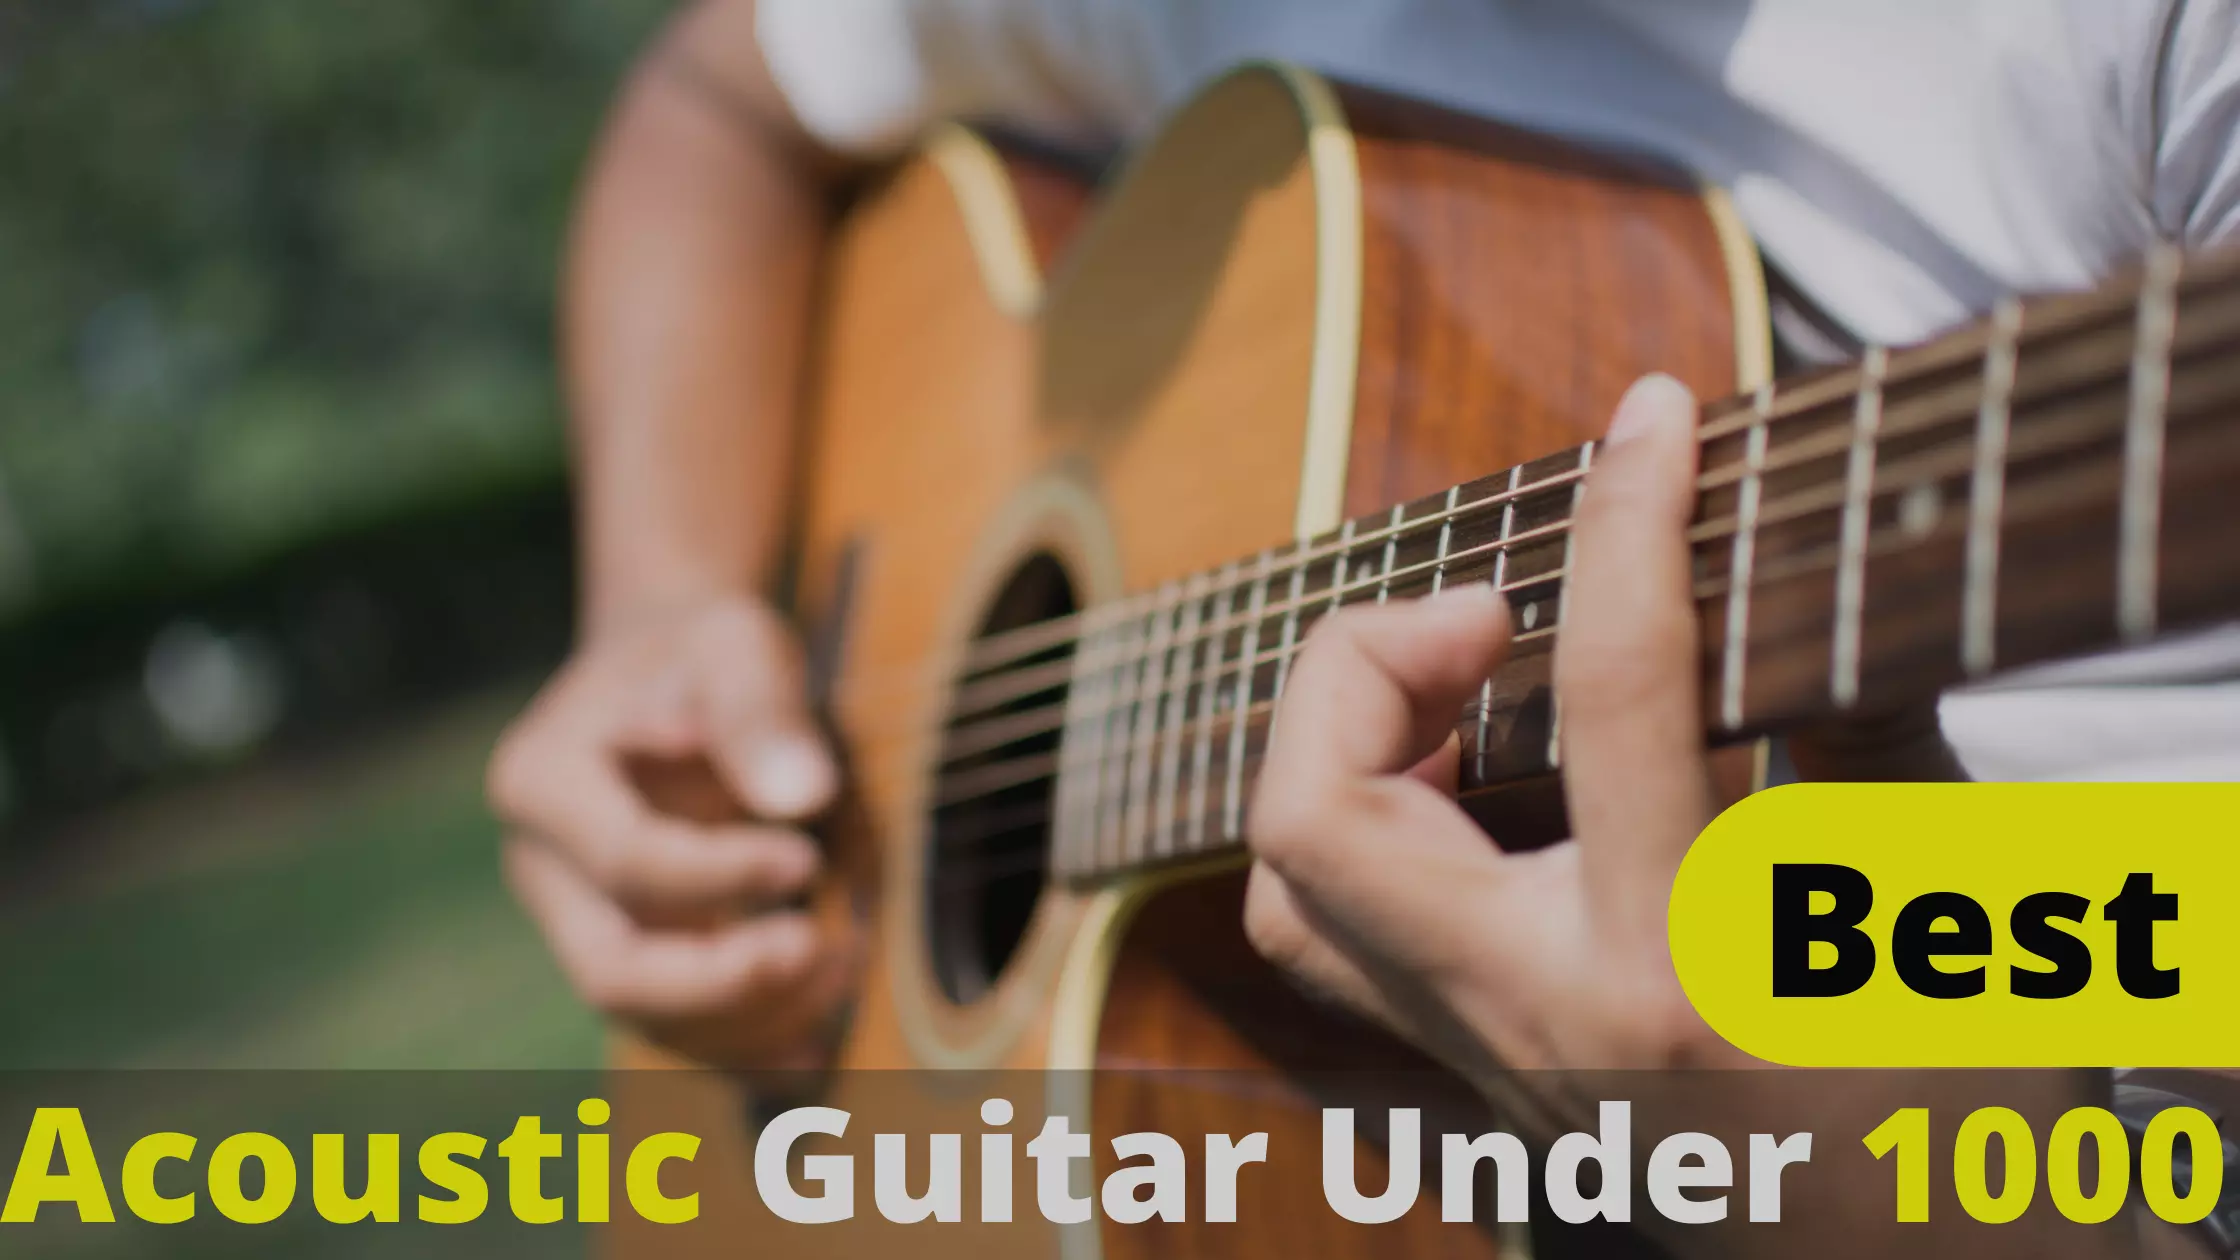 Best Acoustic Guitar Under 1000 - Buying Guide And Reviews 2022